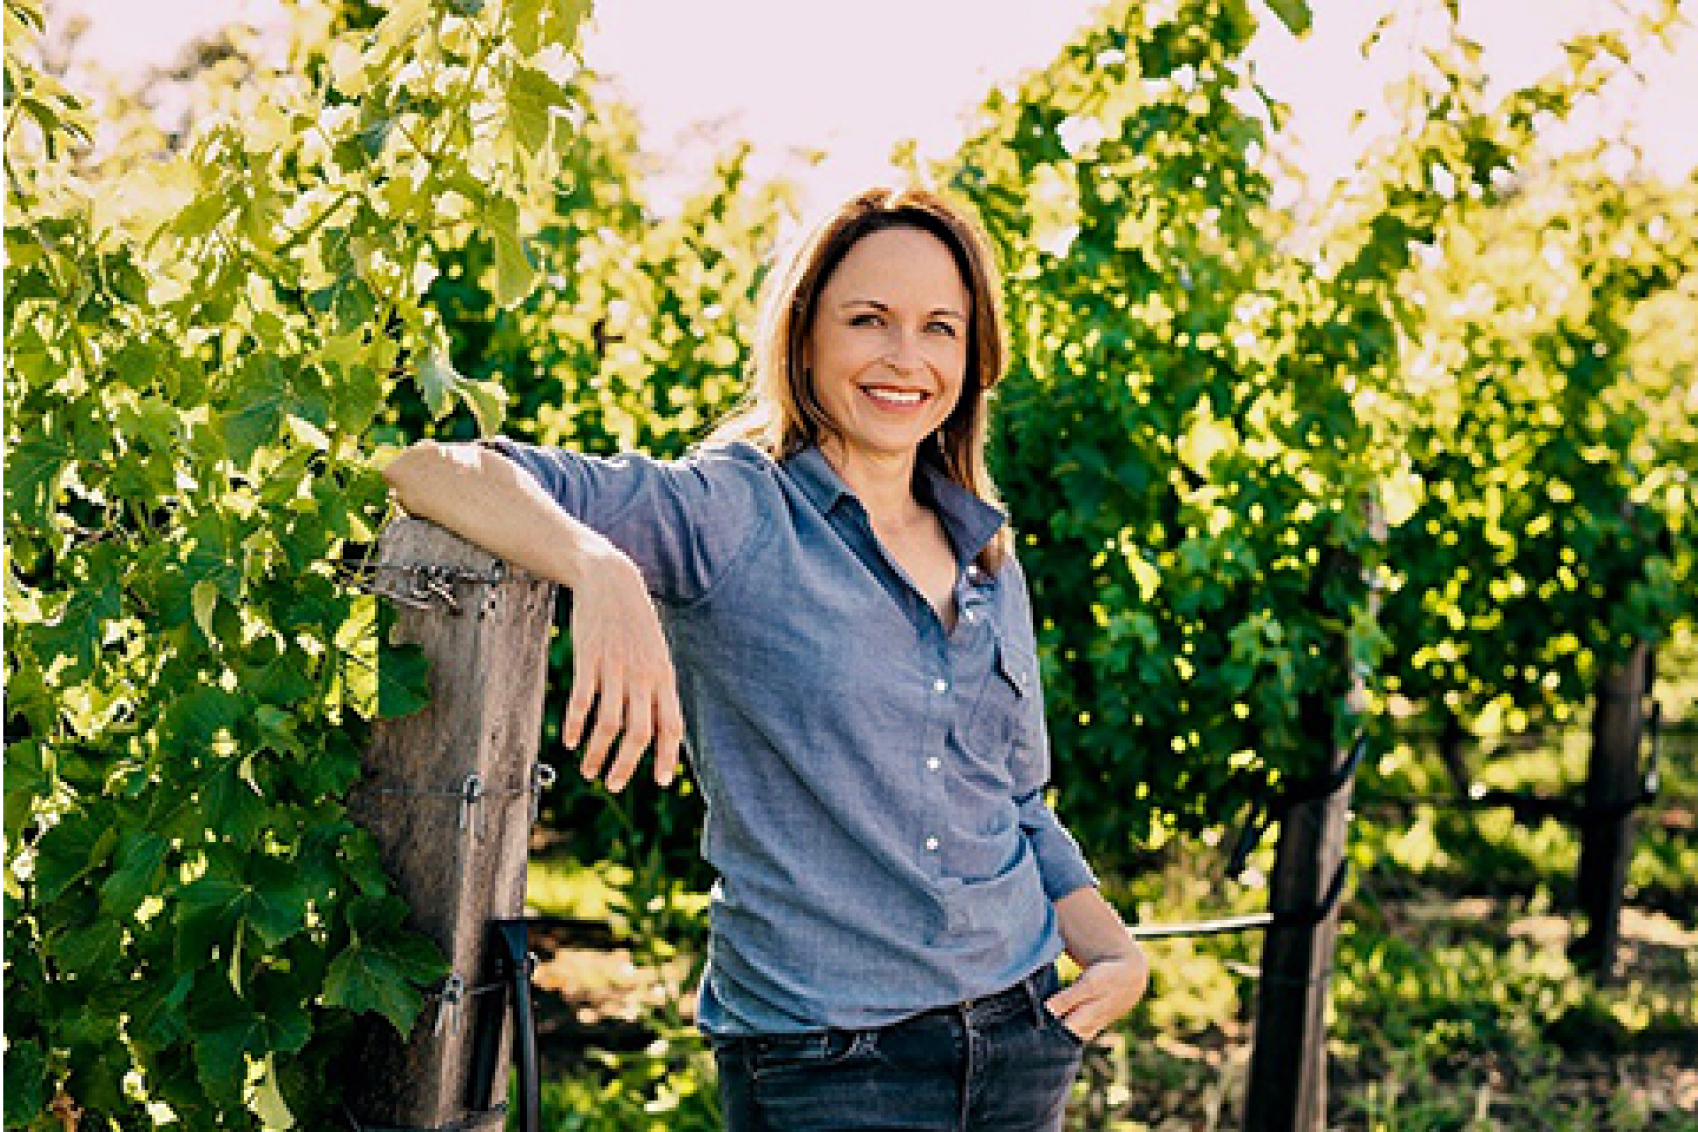 Winemaker of ZIATA wines Jennifer Williams leaning on a fence and smiling by the vines in the sunlight vineyards